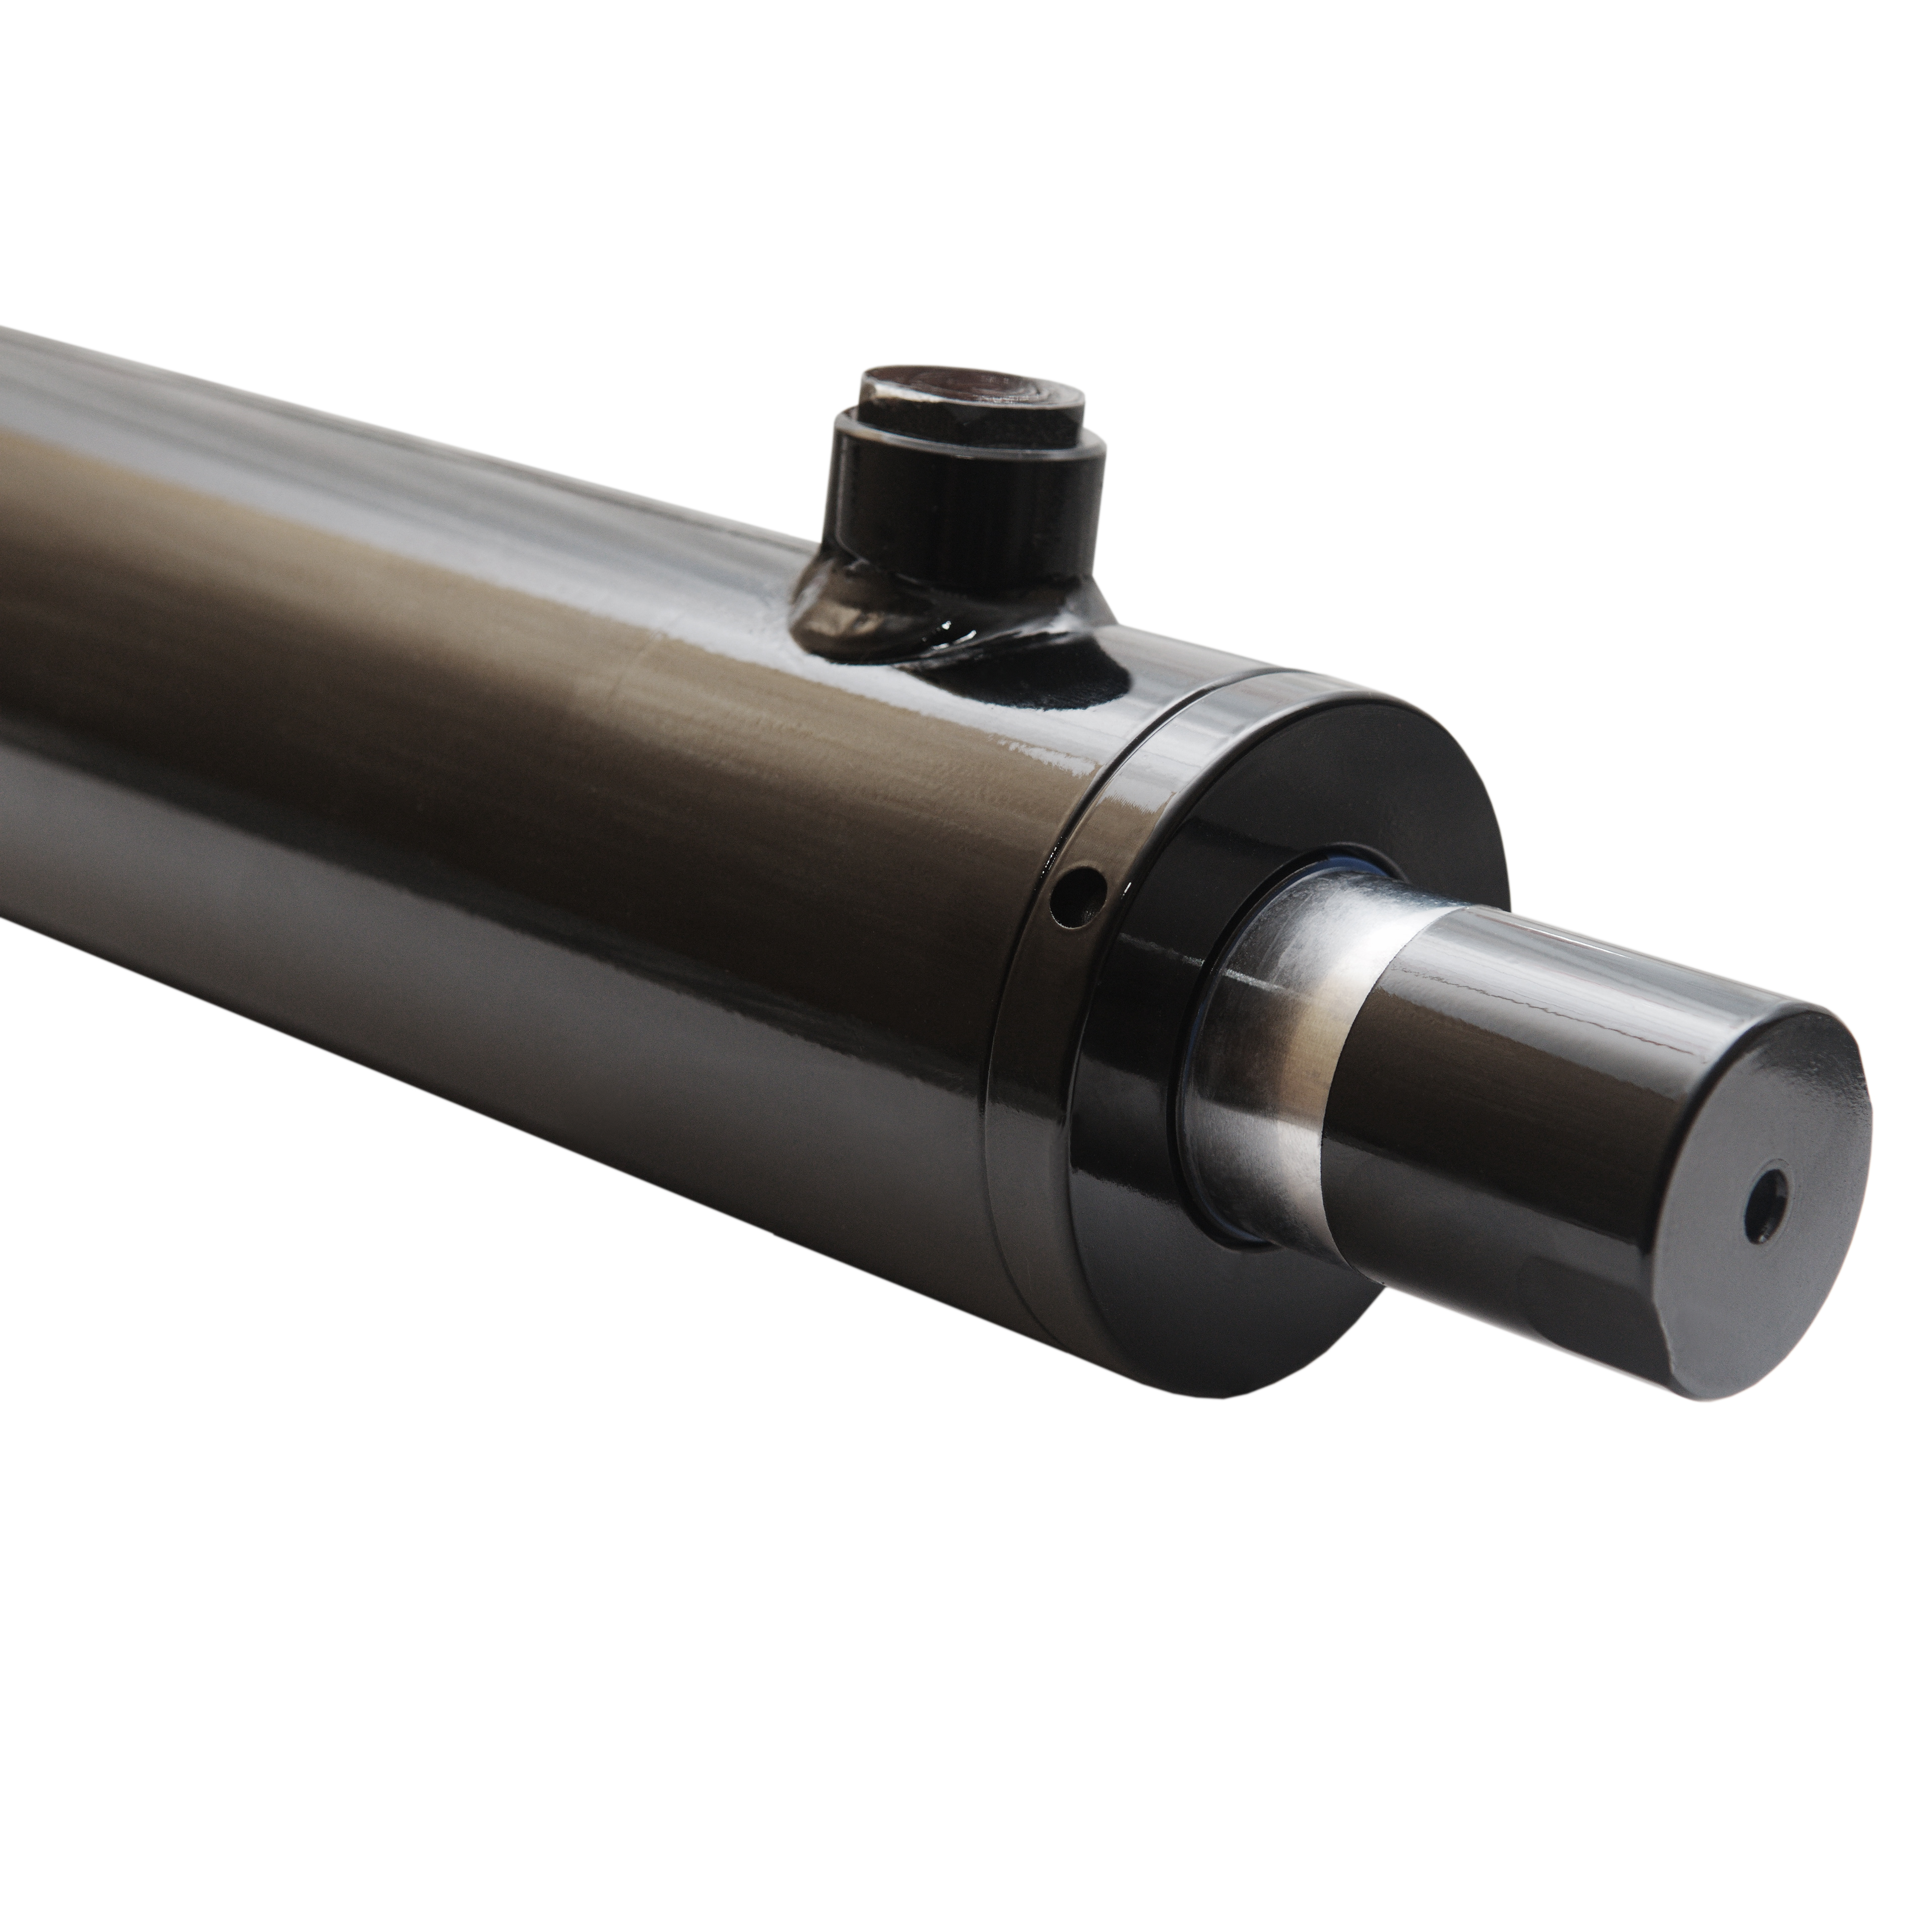 2.5 bore x 24 stroke hydraulic cylinder, welded universal double acting cylinder | Magister Hydraulics